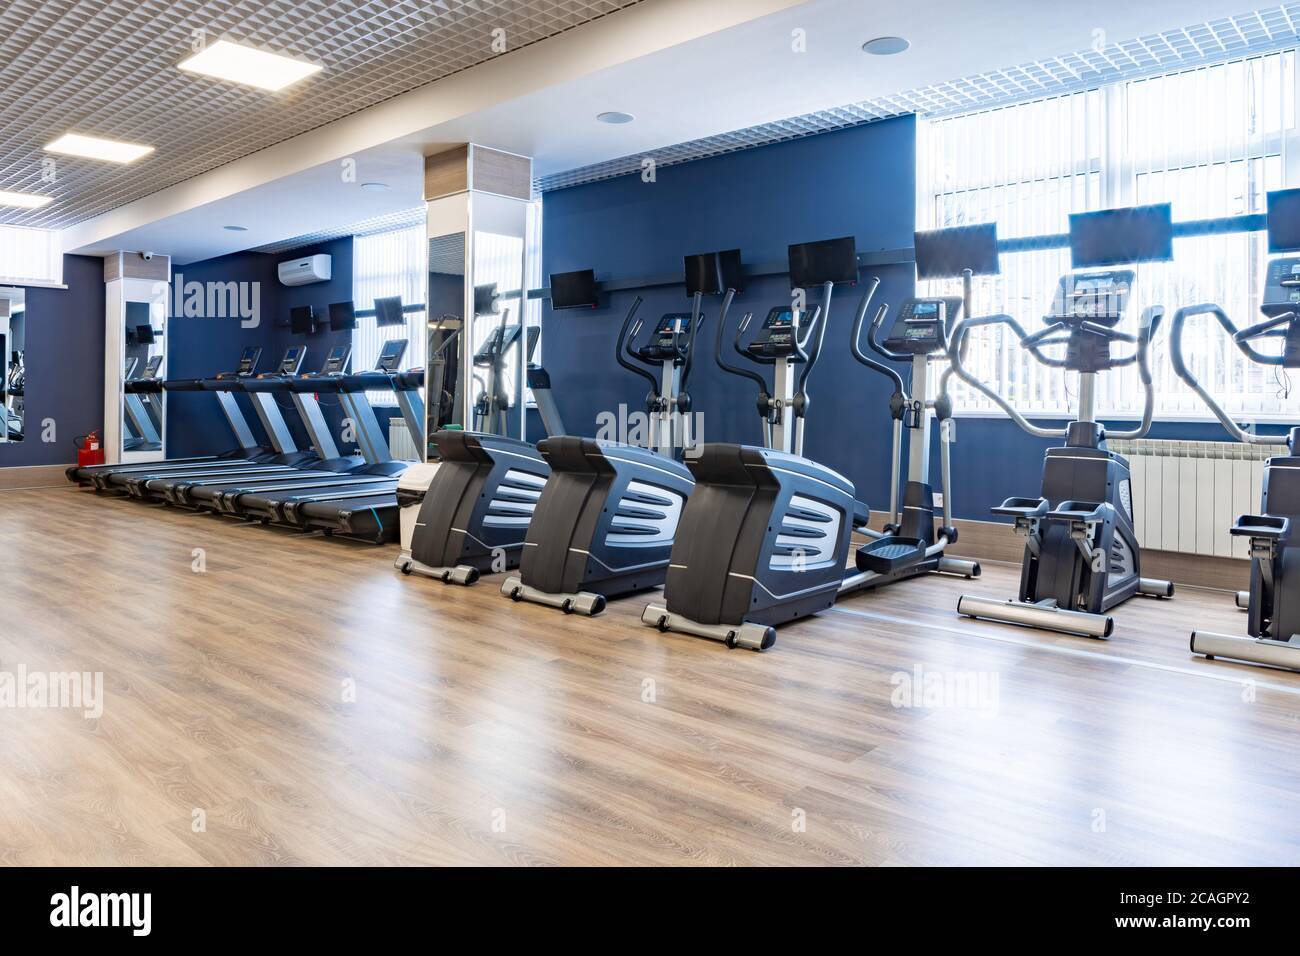 Hotel Fitness Center High Resolution Stock Photography and Images - Alamy